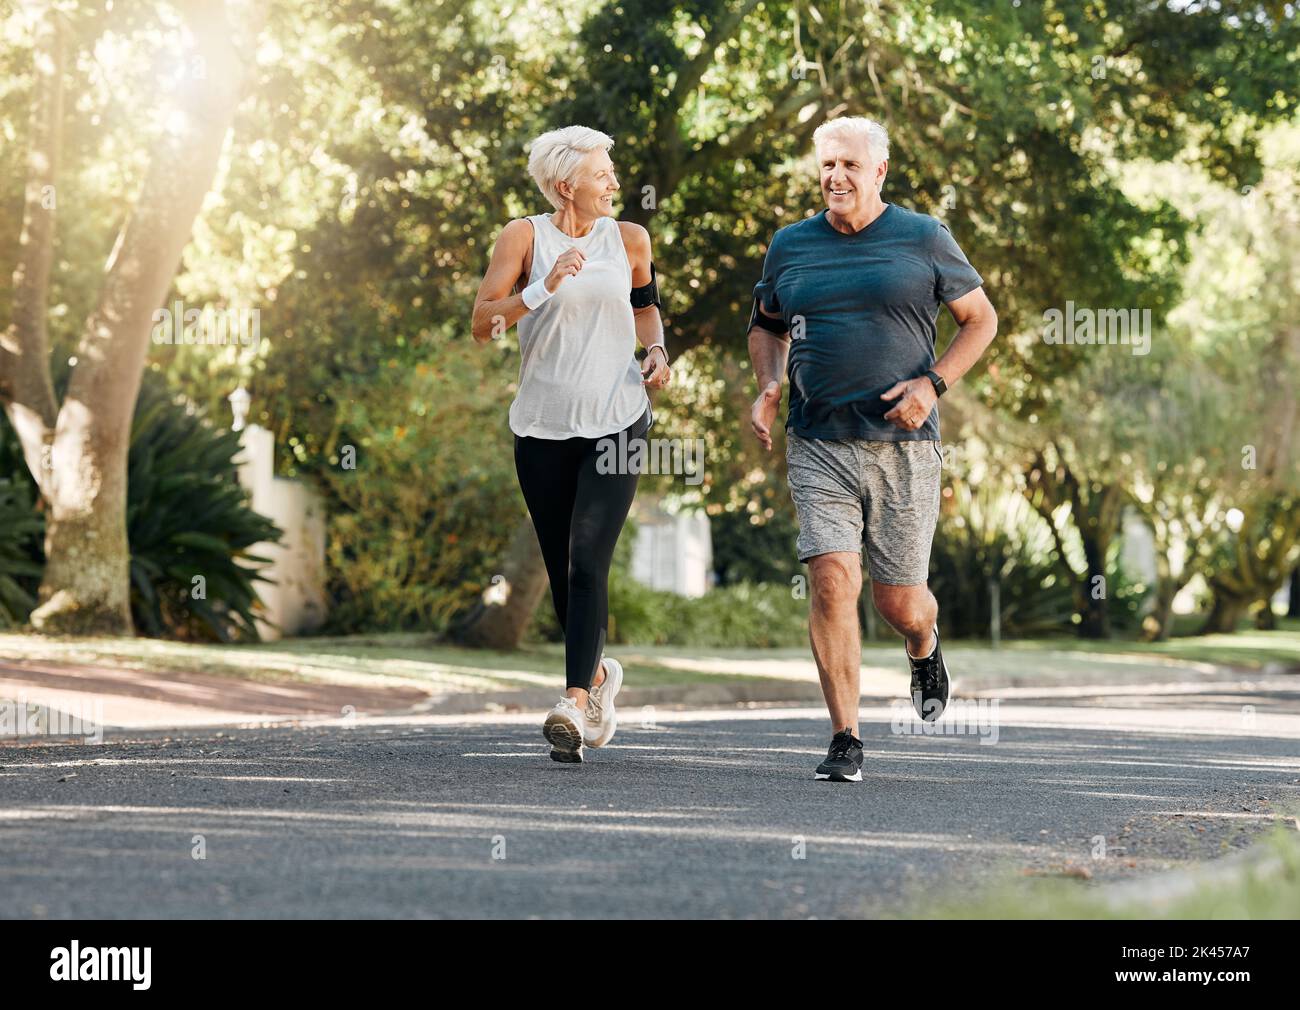 Road running, fitness and senior couple training together on a exercise and workout run. Sports and health motivation of elderly man and woman runner Stock Photo